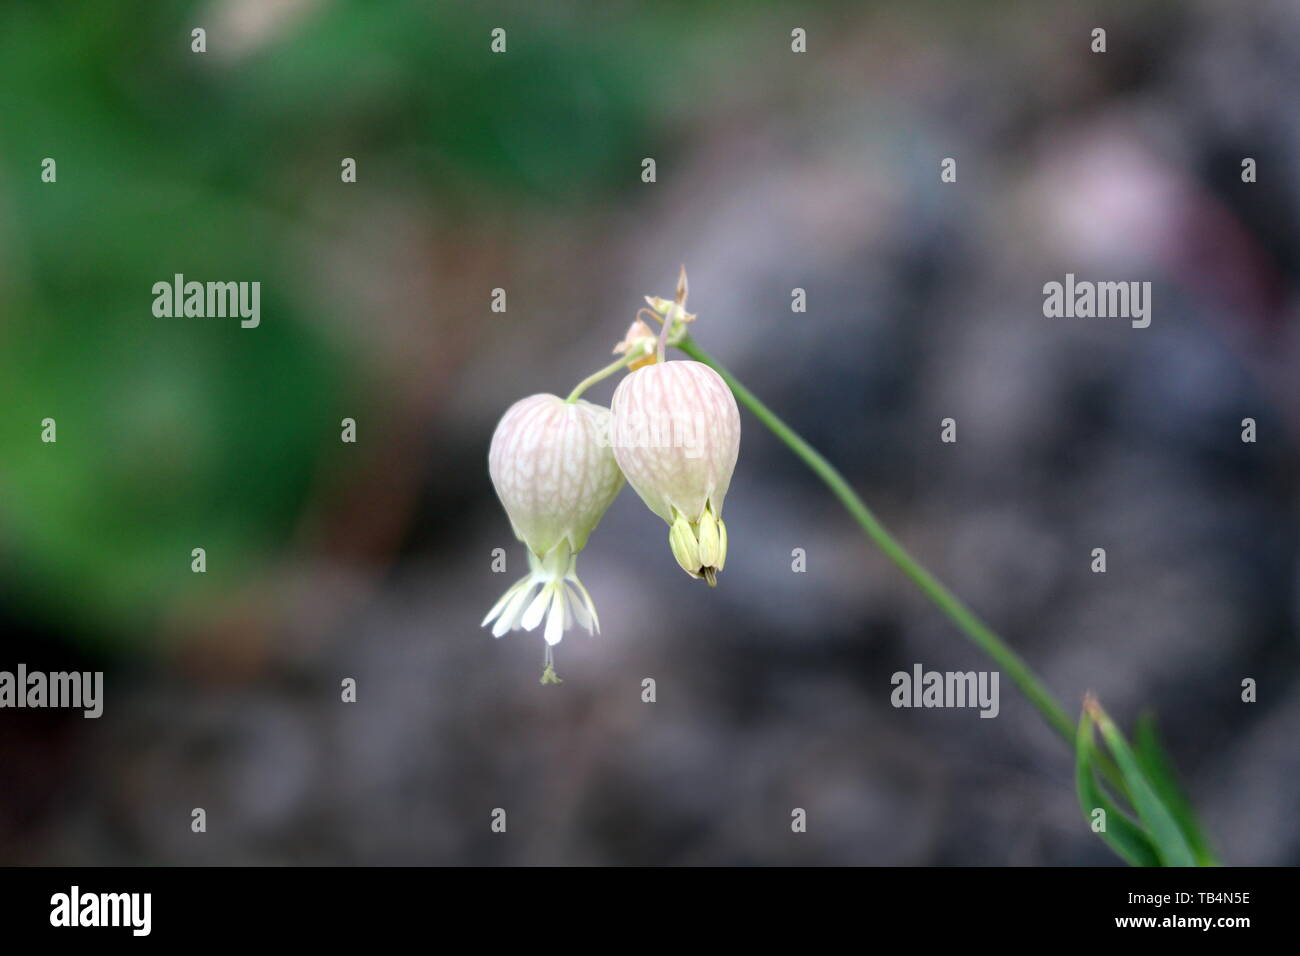 Single of Bladder campion or Silene vulgaris or Maidenstears perennial common wildflower with drooping white flowers and large inflated calyx Stock Photo